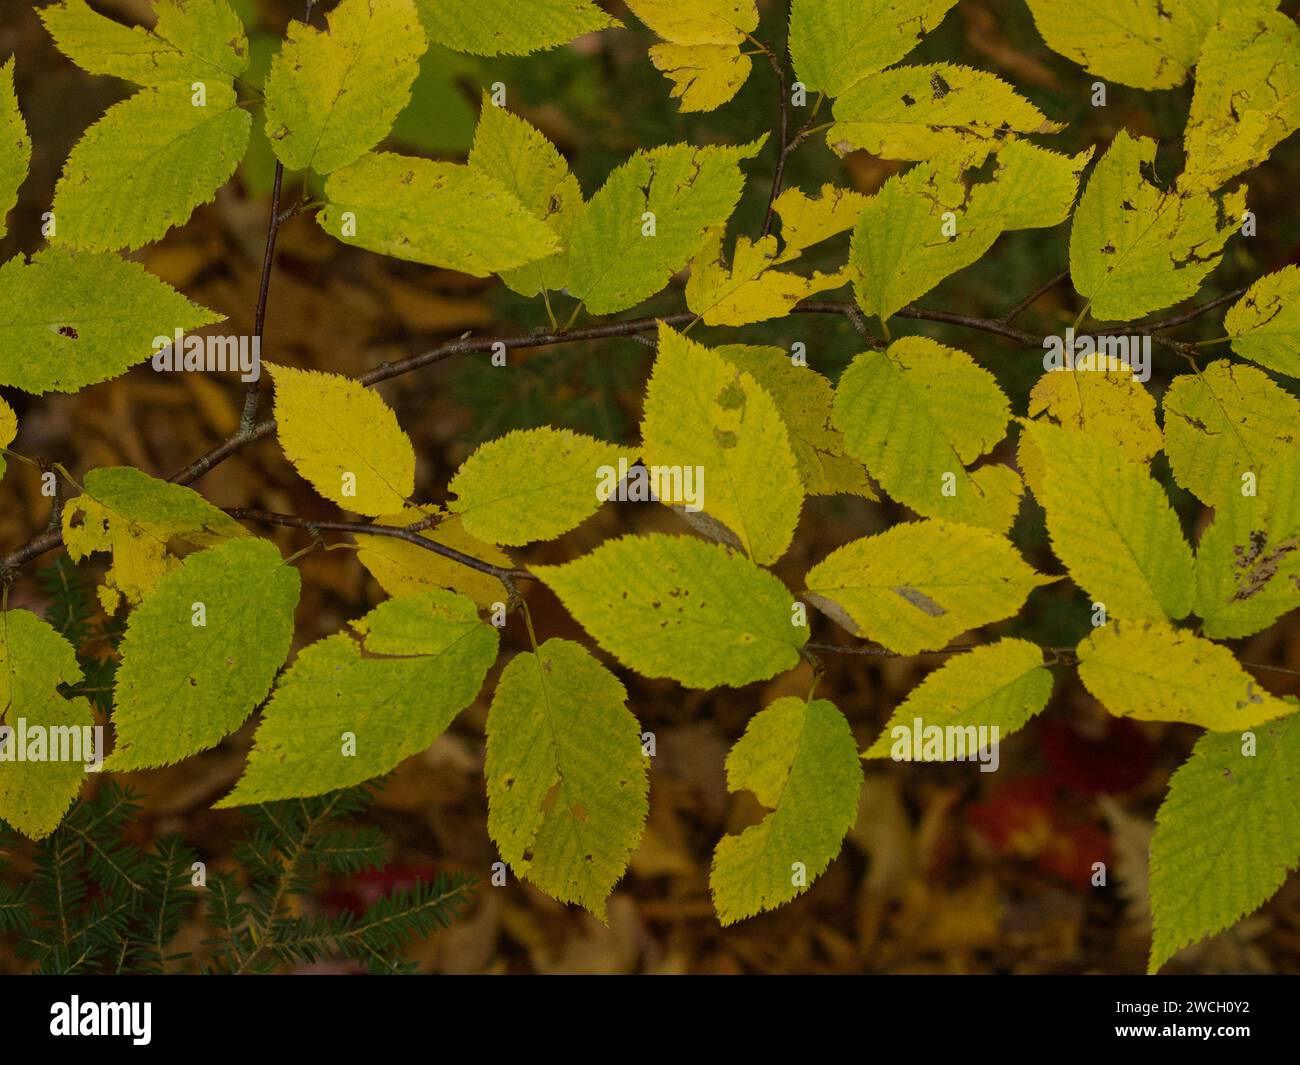 A close-up of a delicate branch adorned with vibrant yellow and green leaves Stock Photo